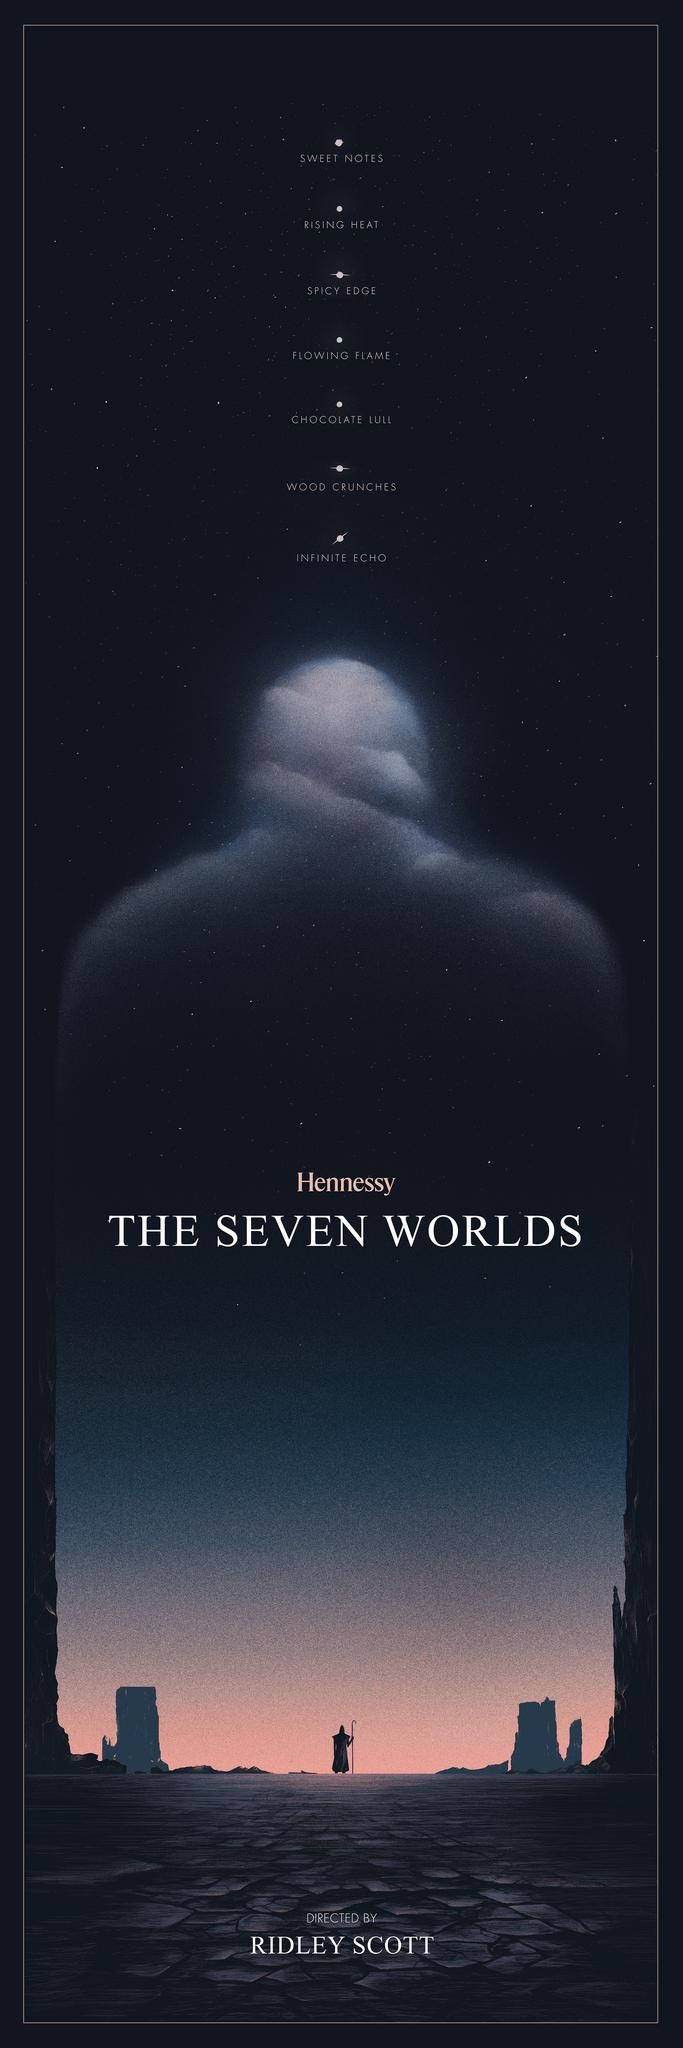 The Seven Worlds Poster